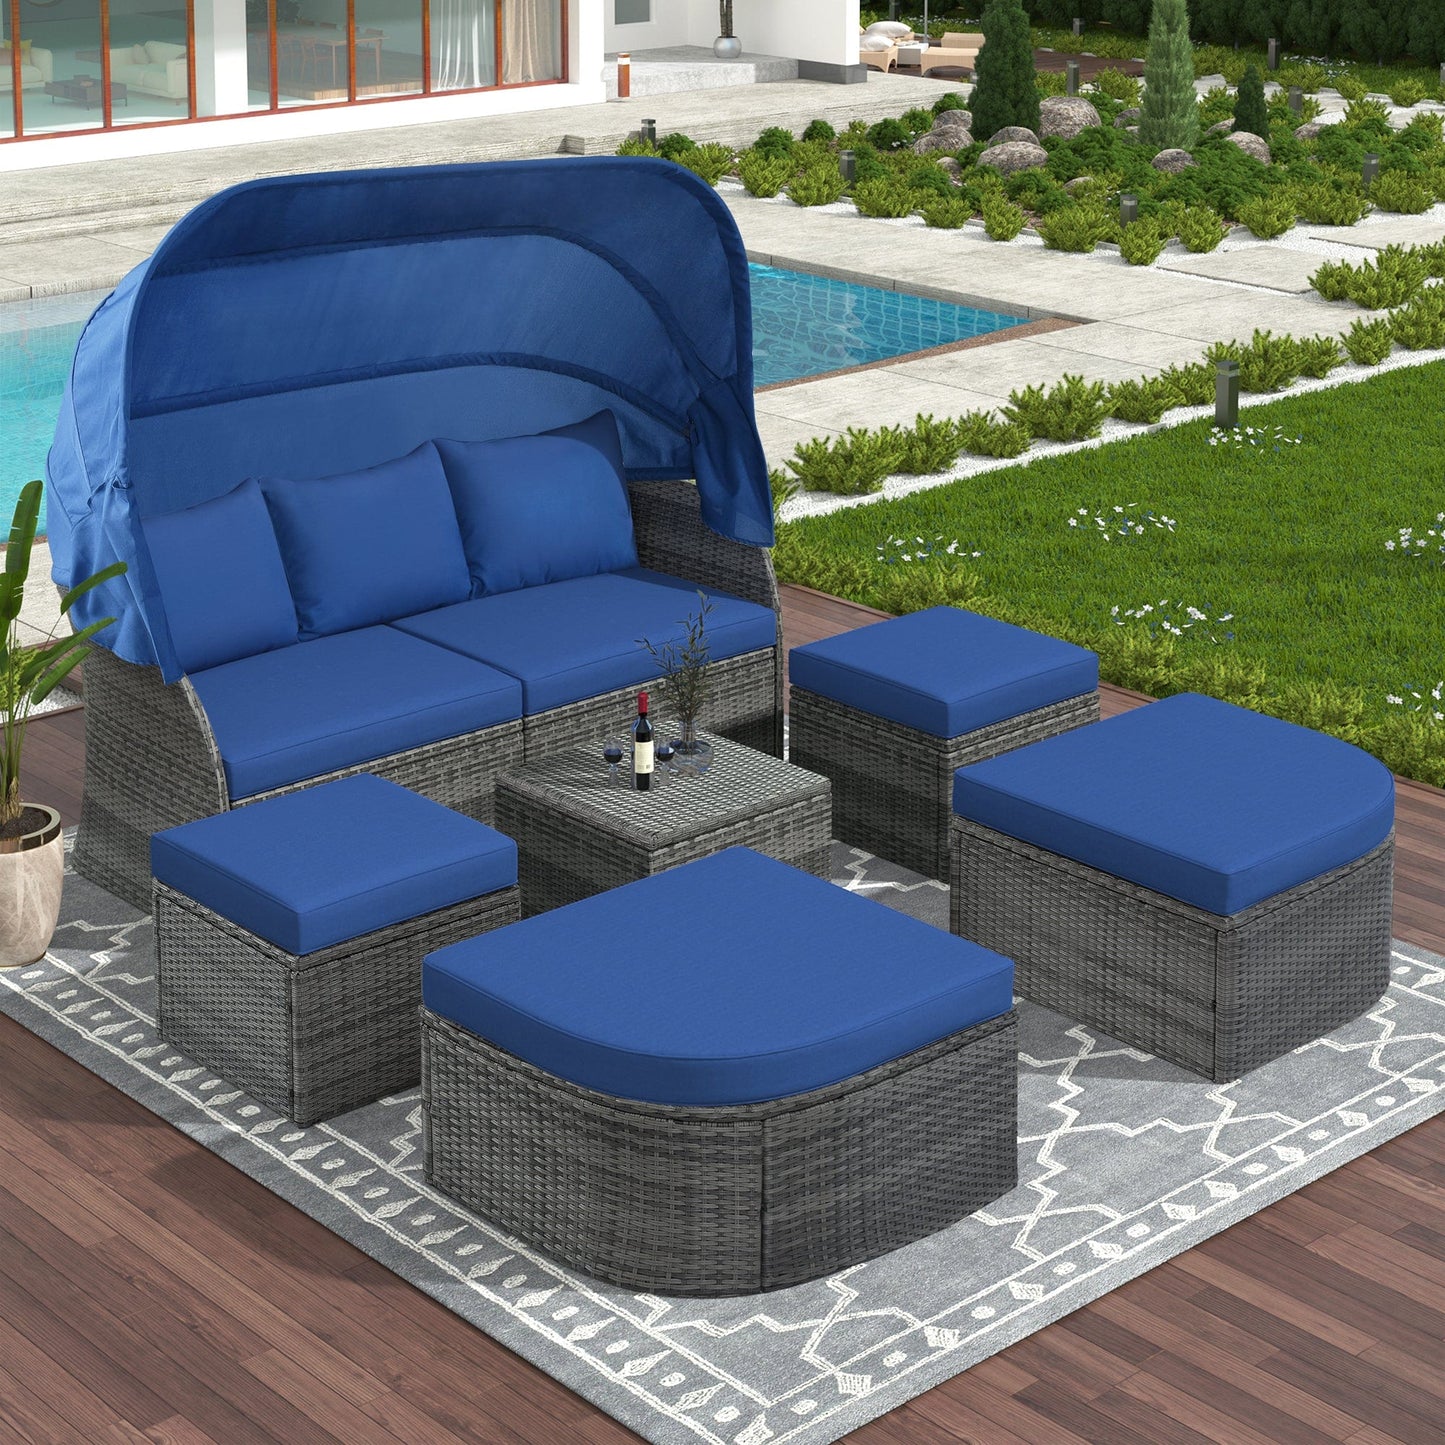 1st Choice Furniture Direct Daybed 1st Choice Outdoor Patio Set Daybed Sunbed with Retractable Canopy